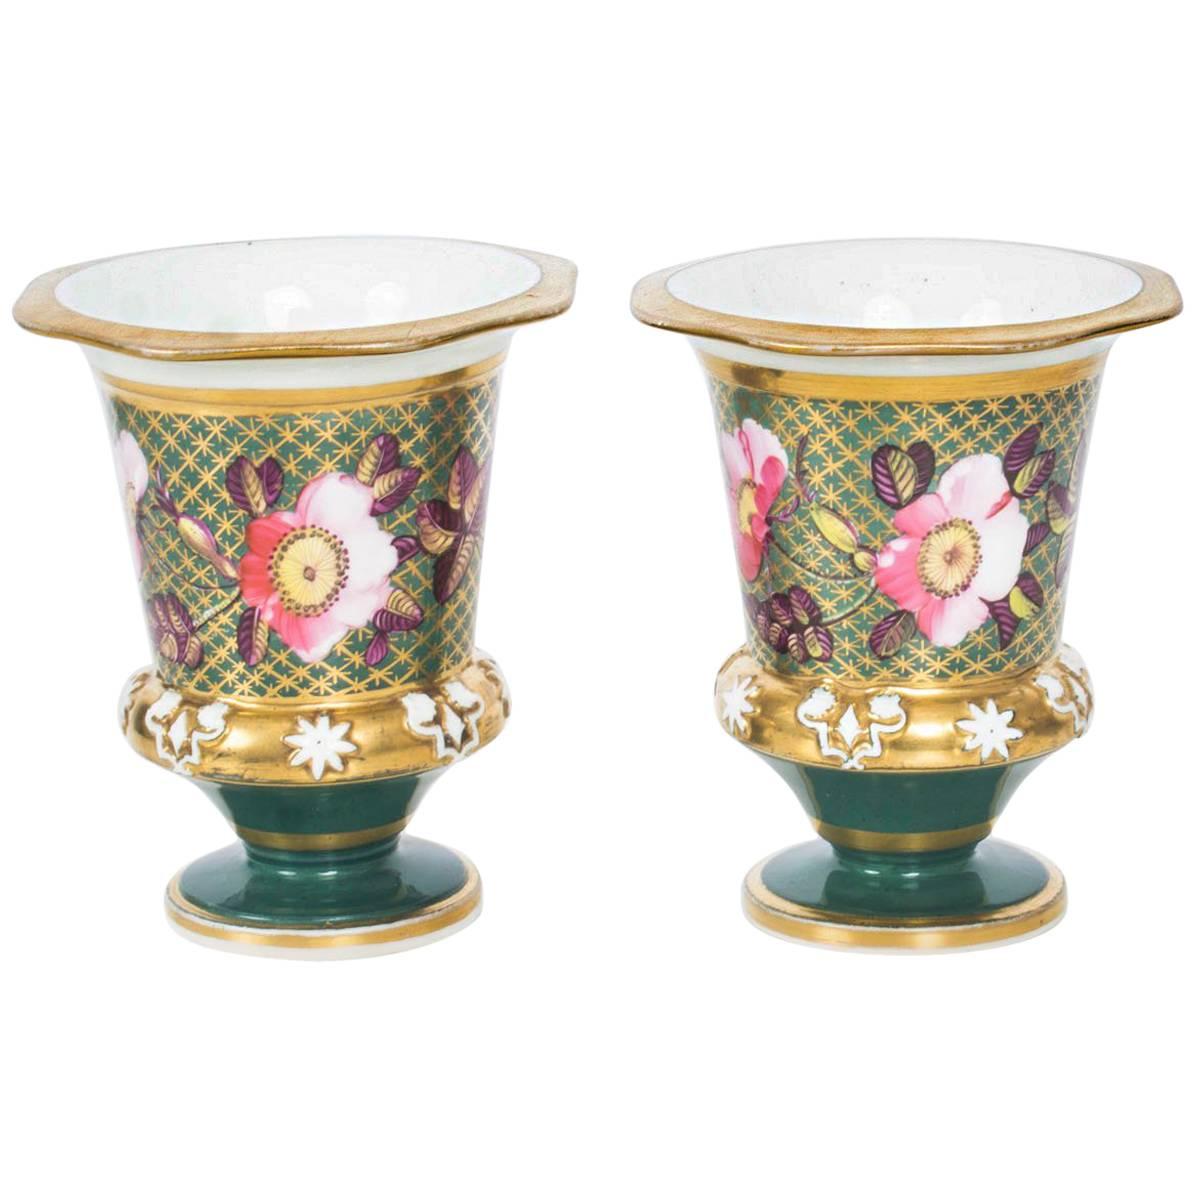 Antique Pair of Green and Gilt Regency English Beaker Matchpots, 19th Century